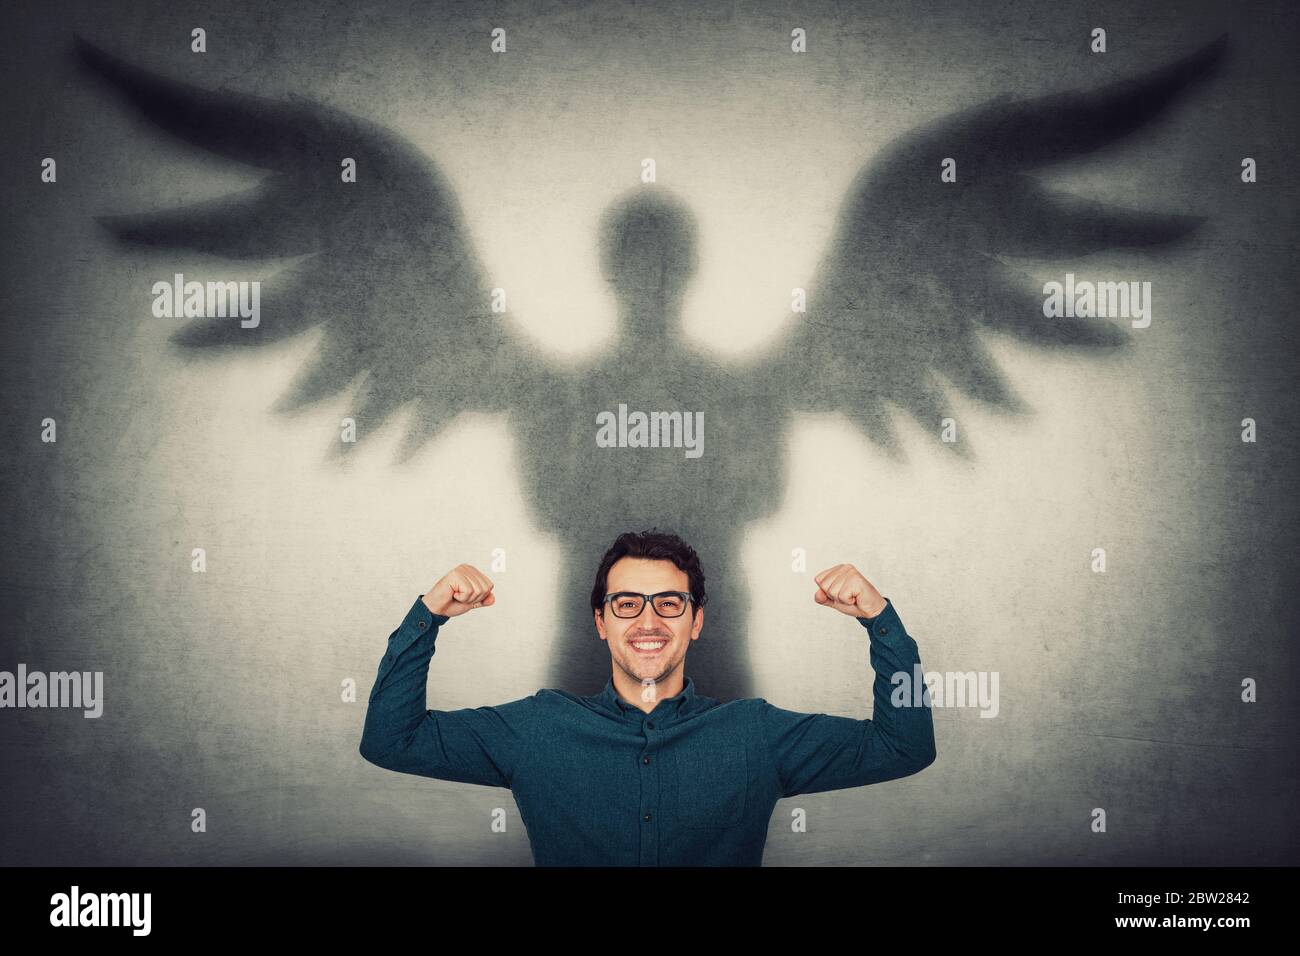 Confident businessman flexing muscles imagine superpower. Guy shows his strength, casting a superhero shadow with angel wings on a wall. Personal deve Stock Photo